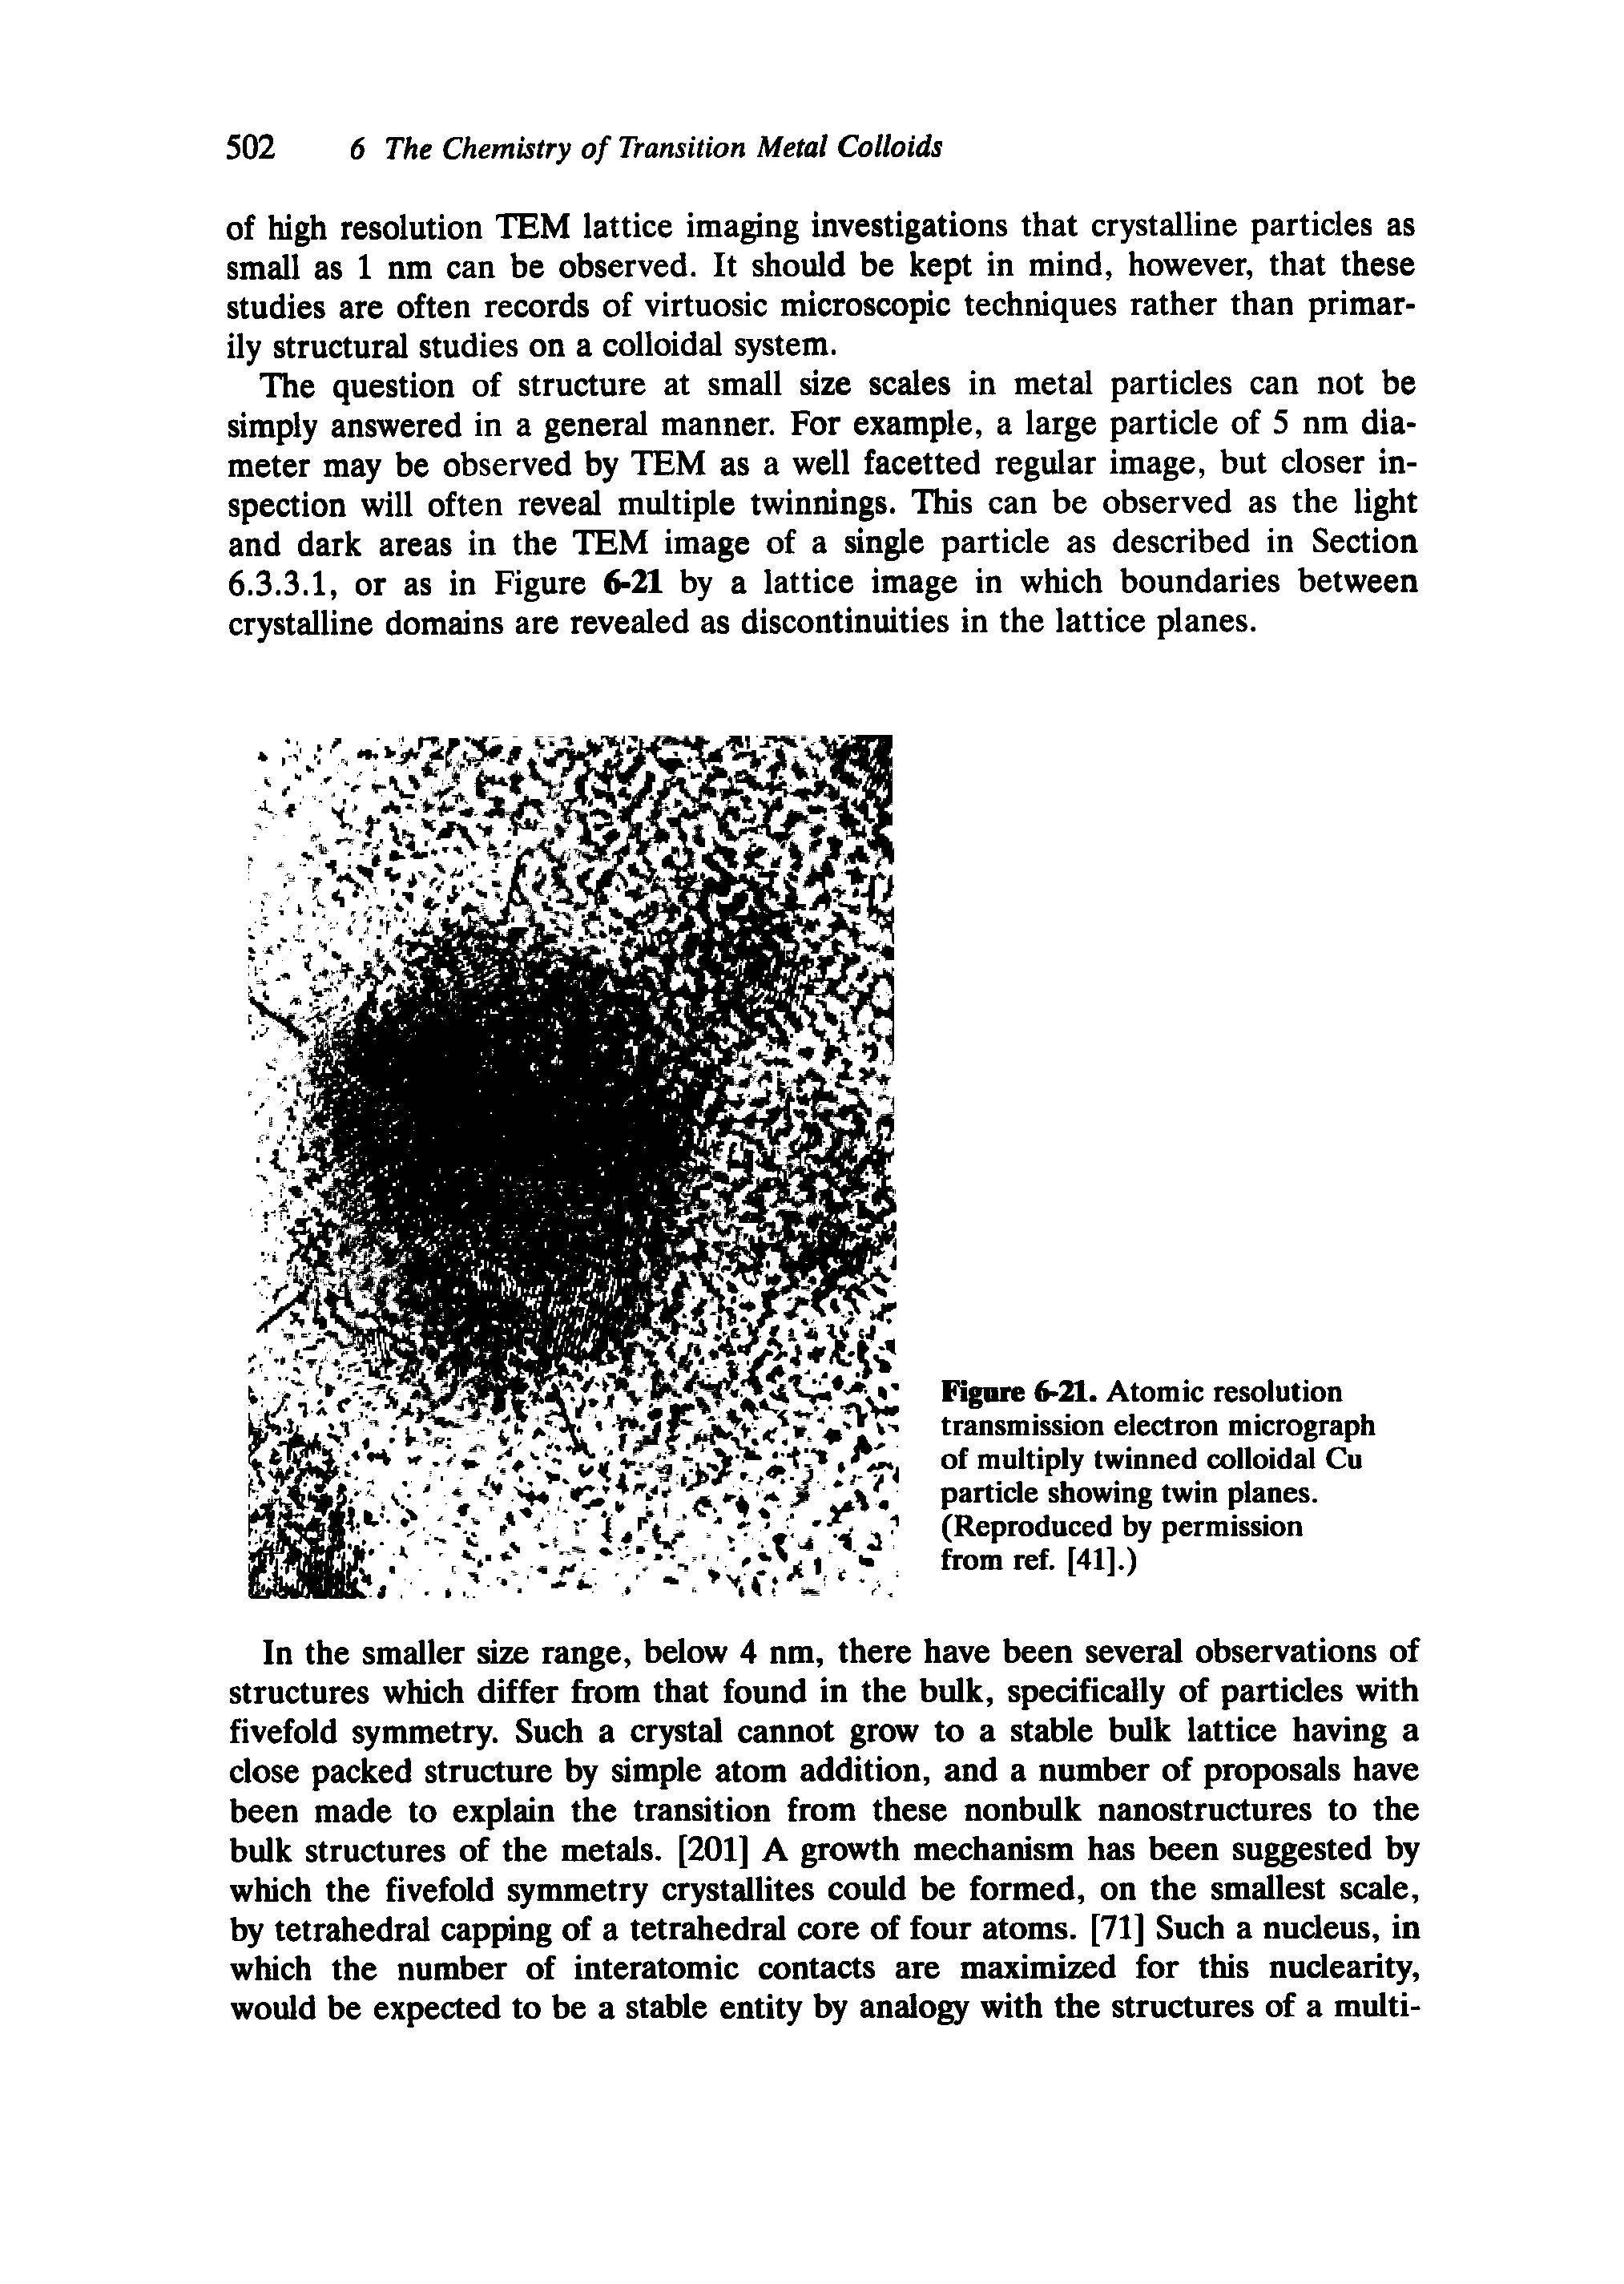 Figure 6-21. Atomic resolution transmission electron micrograph of multiply twinned colloidal Cu particle showing twin planes. (Reproduced by permission from ref. [41].)...